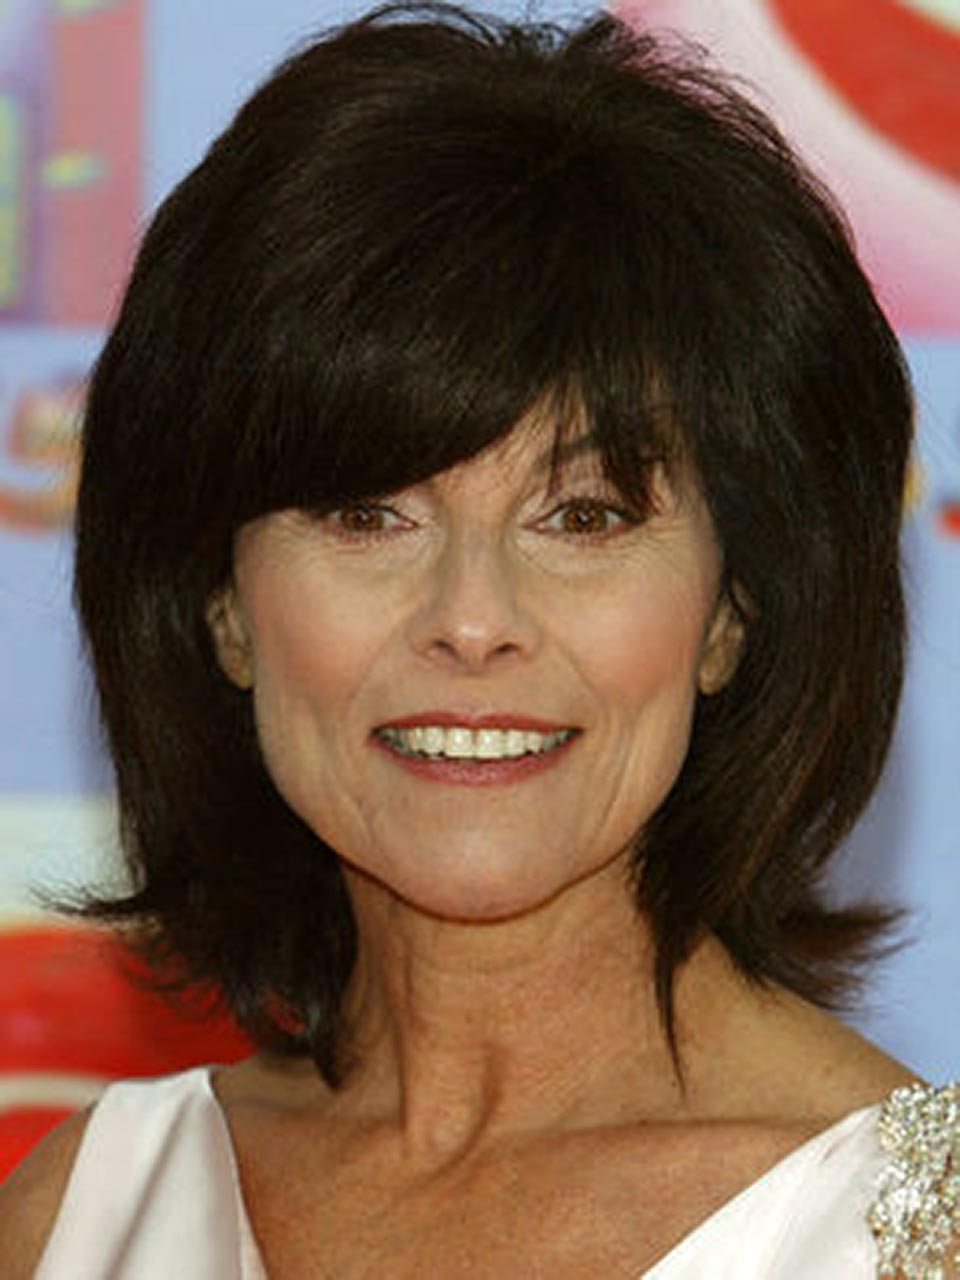 Black Actresses Nude - Adrienne Barbeau Nude Pics â€” This Actress Had Huge Tits ...